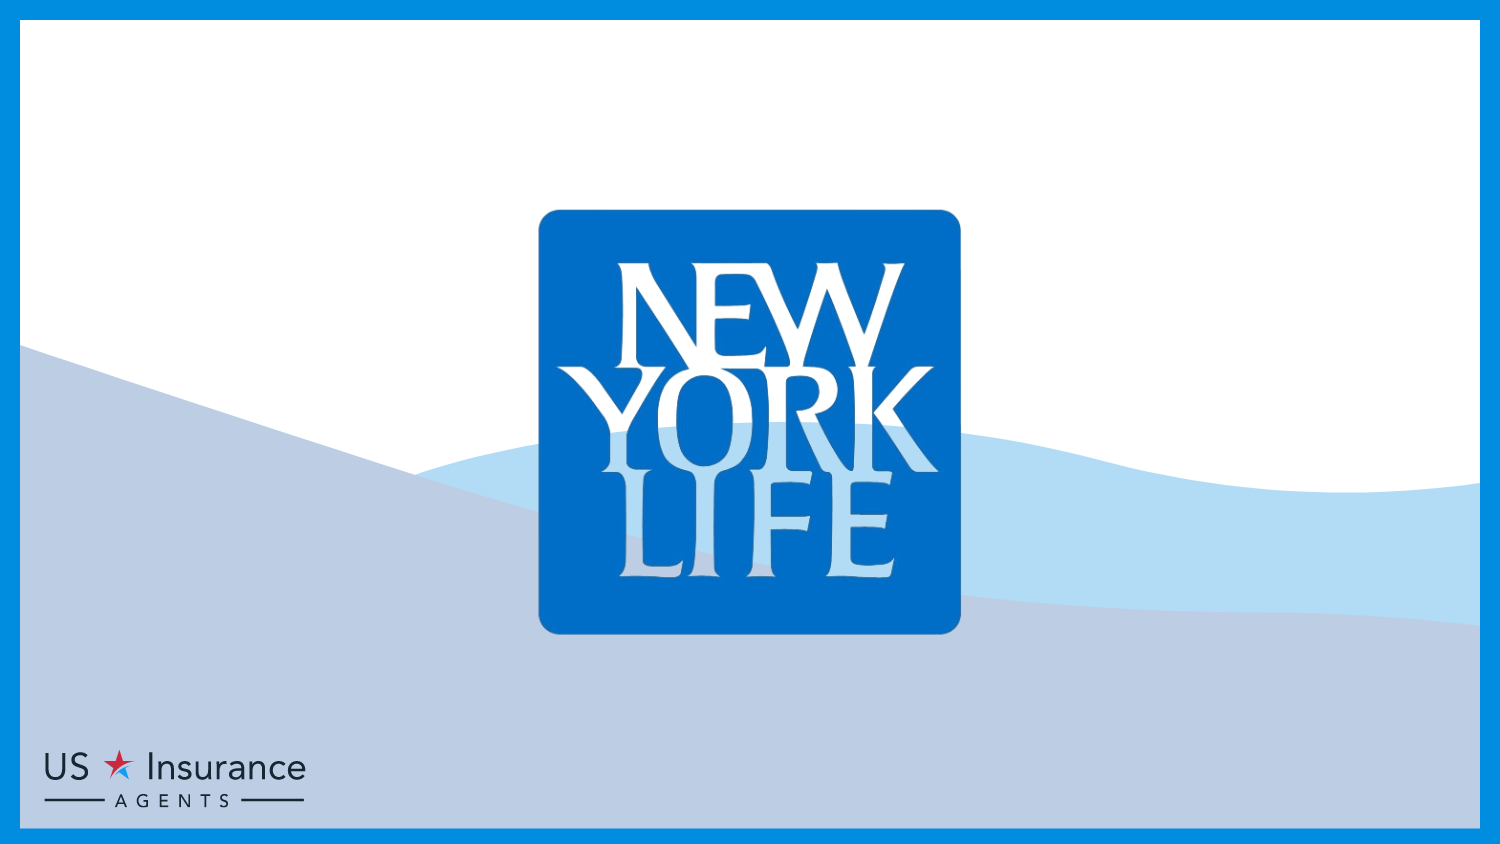 New York Life: Best Life Insurance for Cyclists